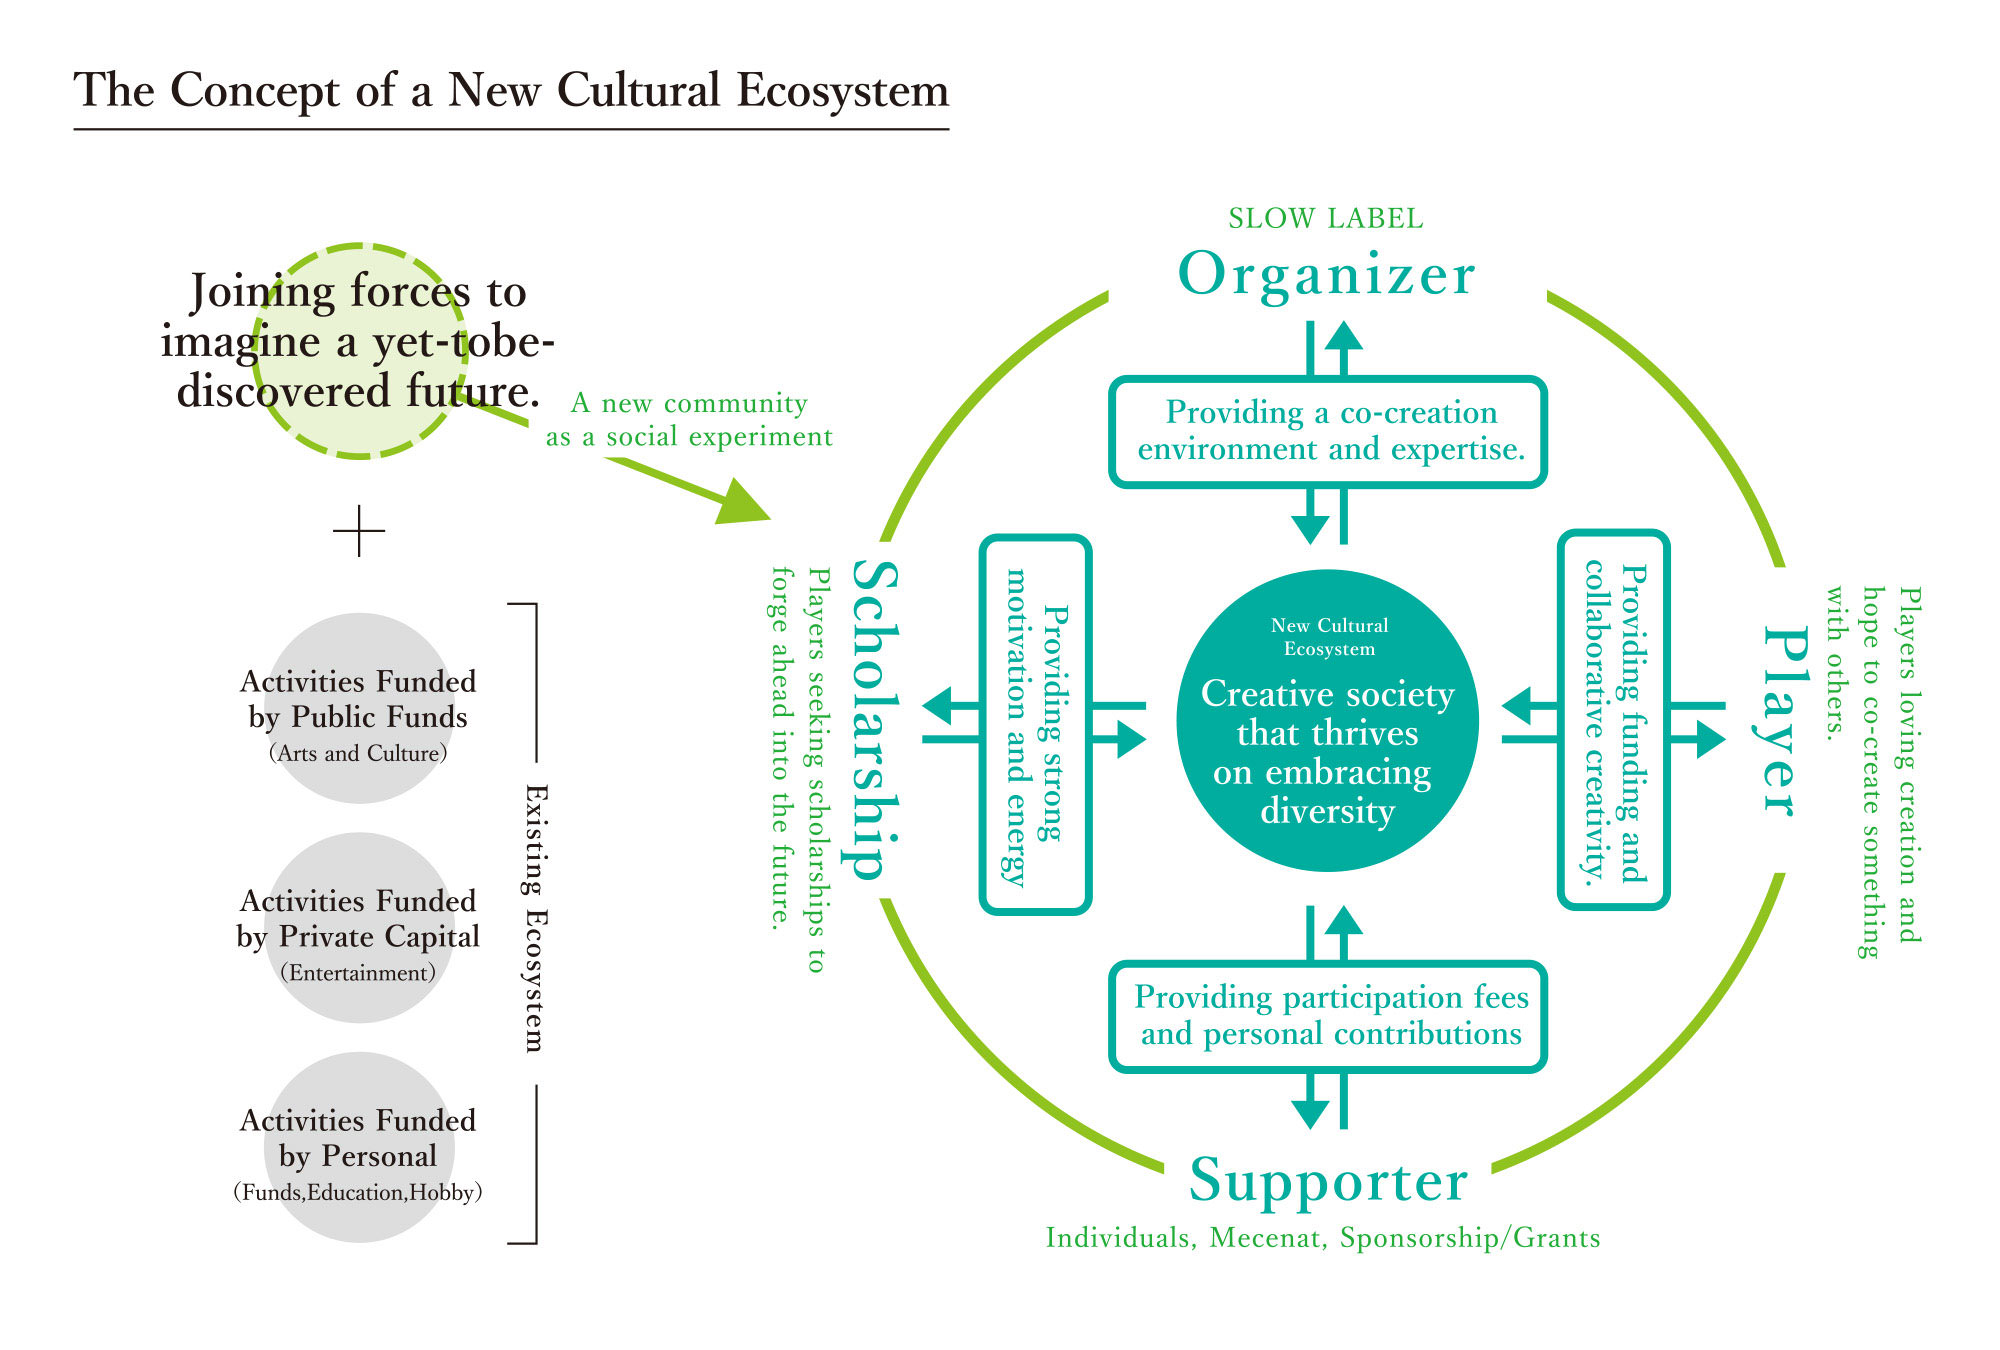 Envisioning a new cultural eco-system